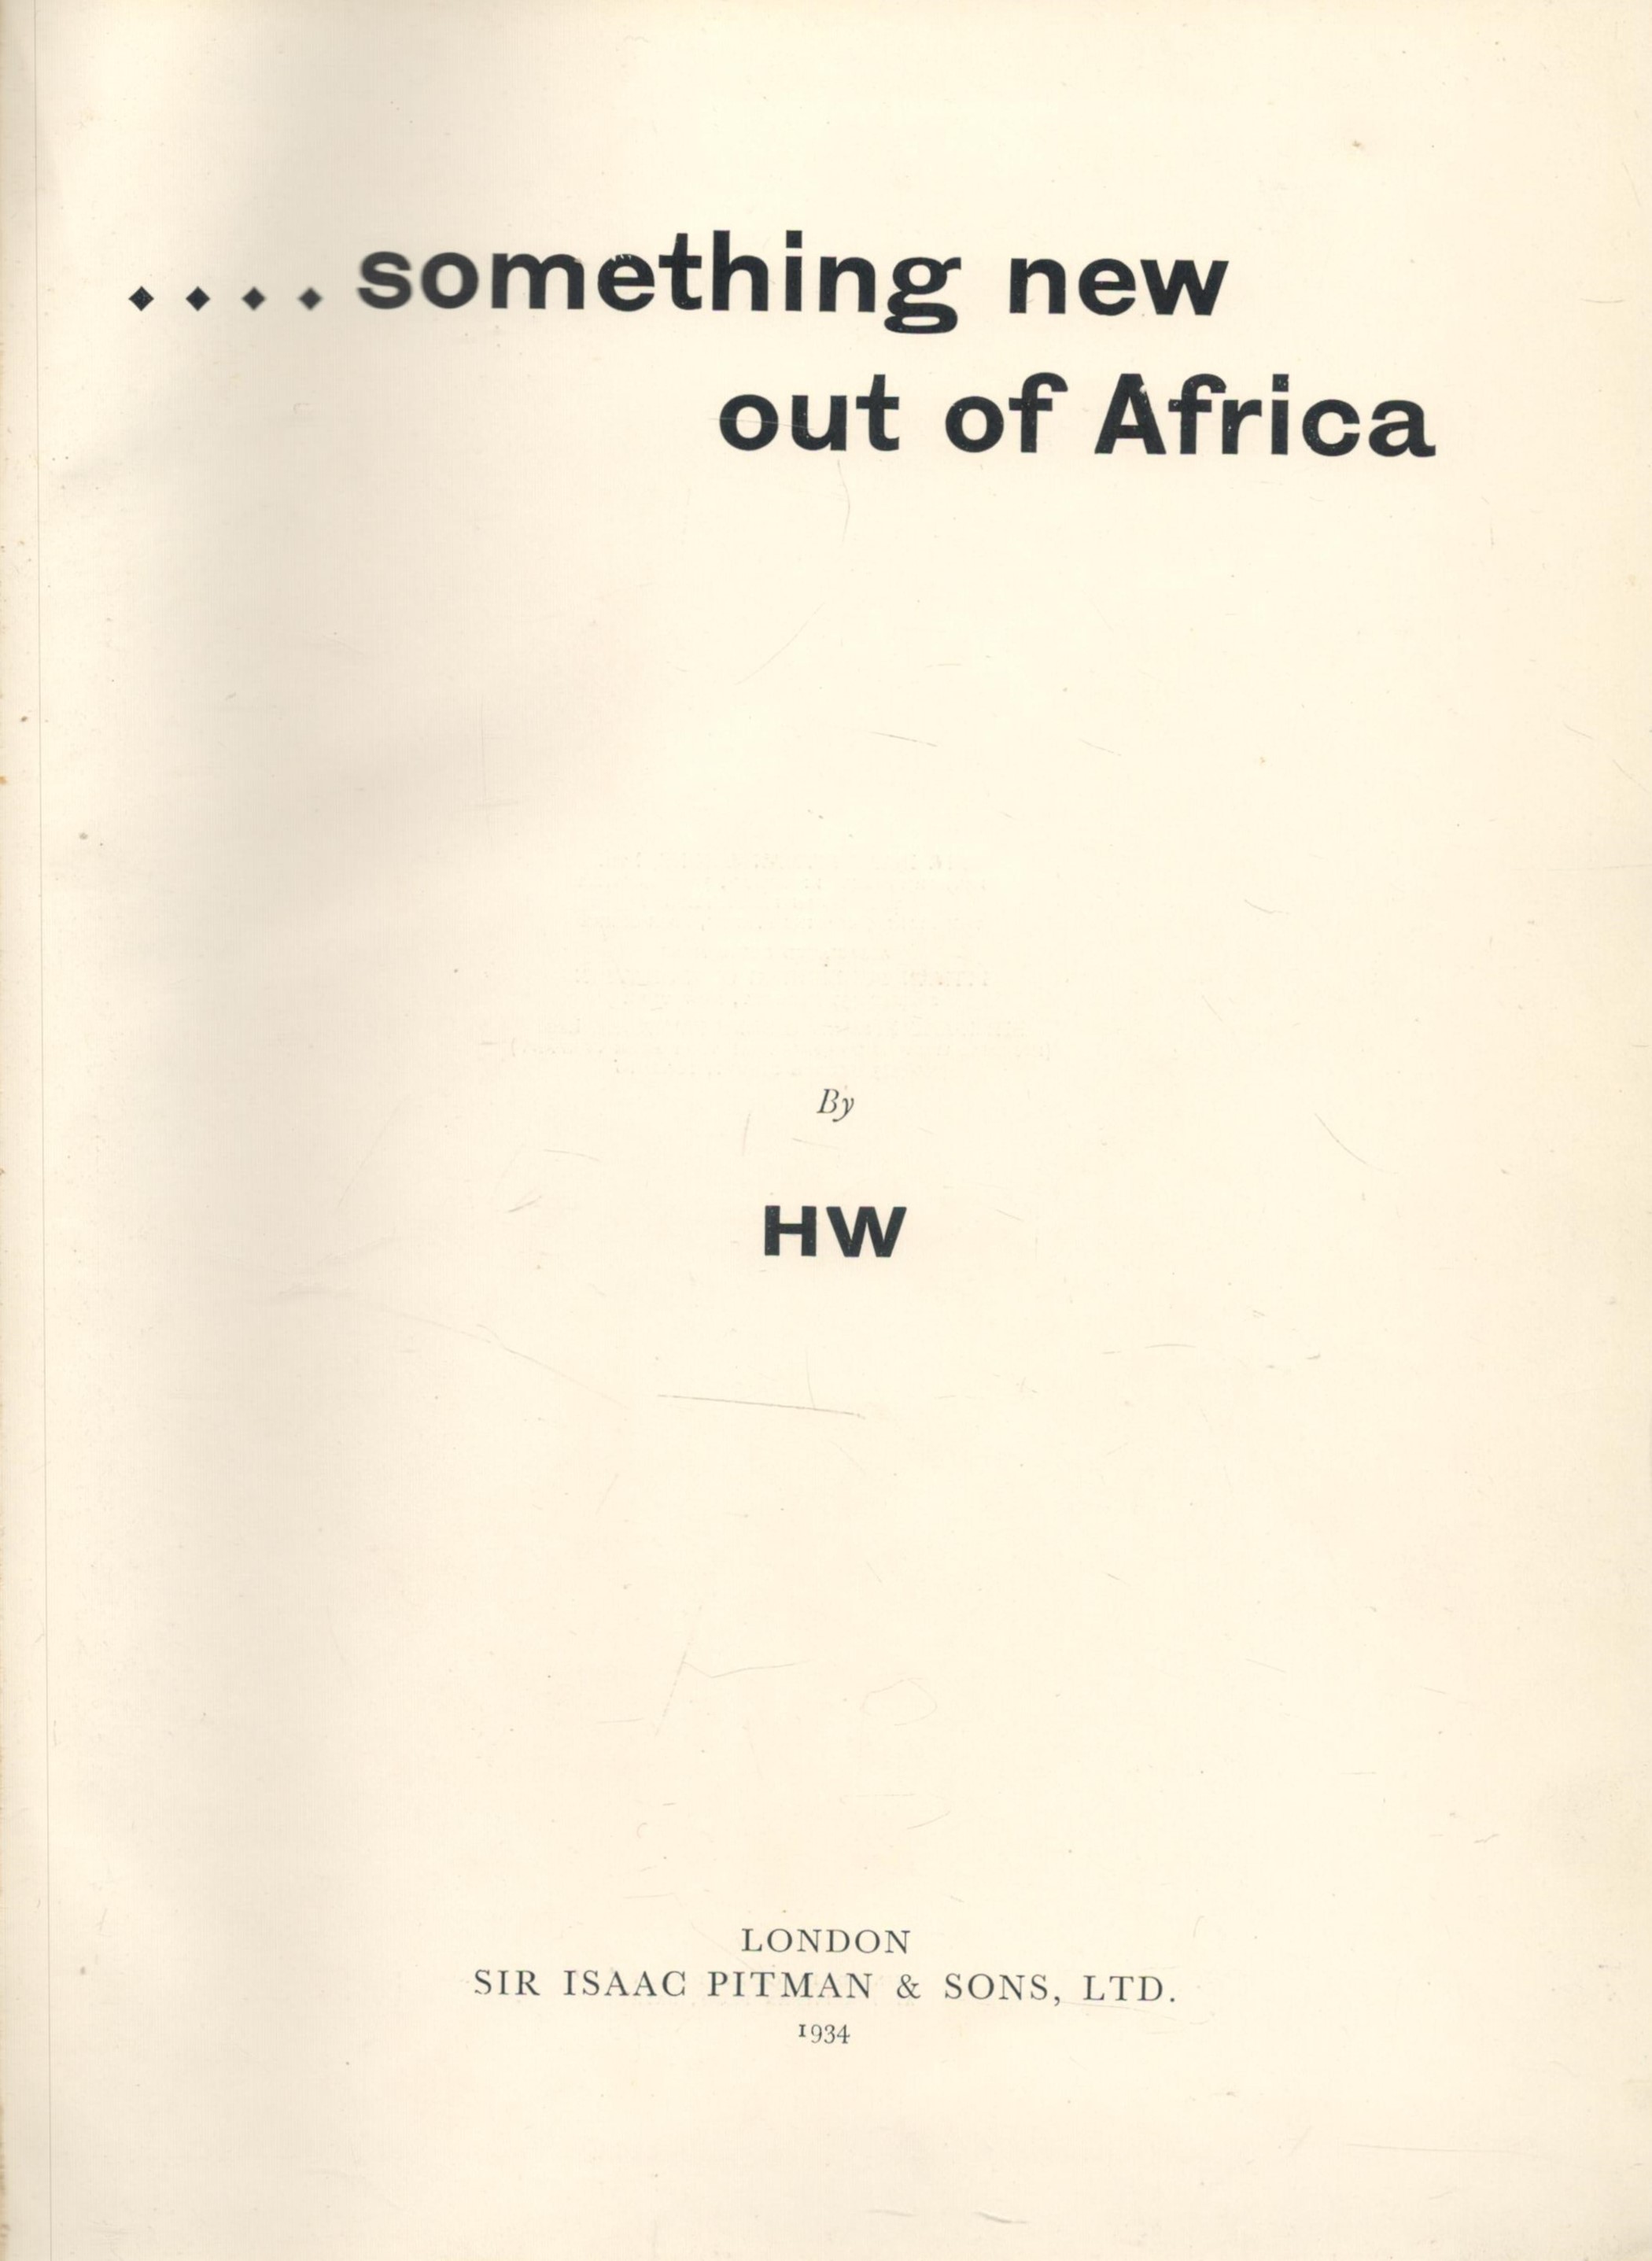 Something New Out of Africa by H W 1934 First Edition Hardback Book with 207 pages published by - Image 2 of 3